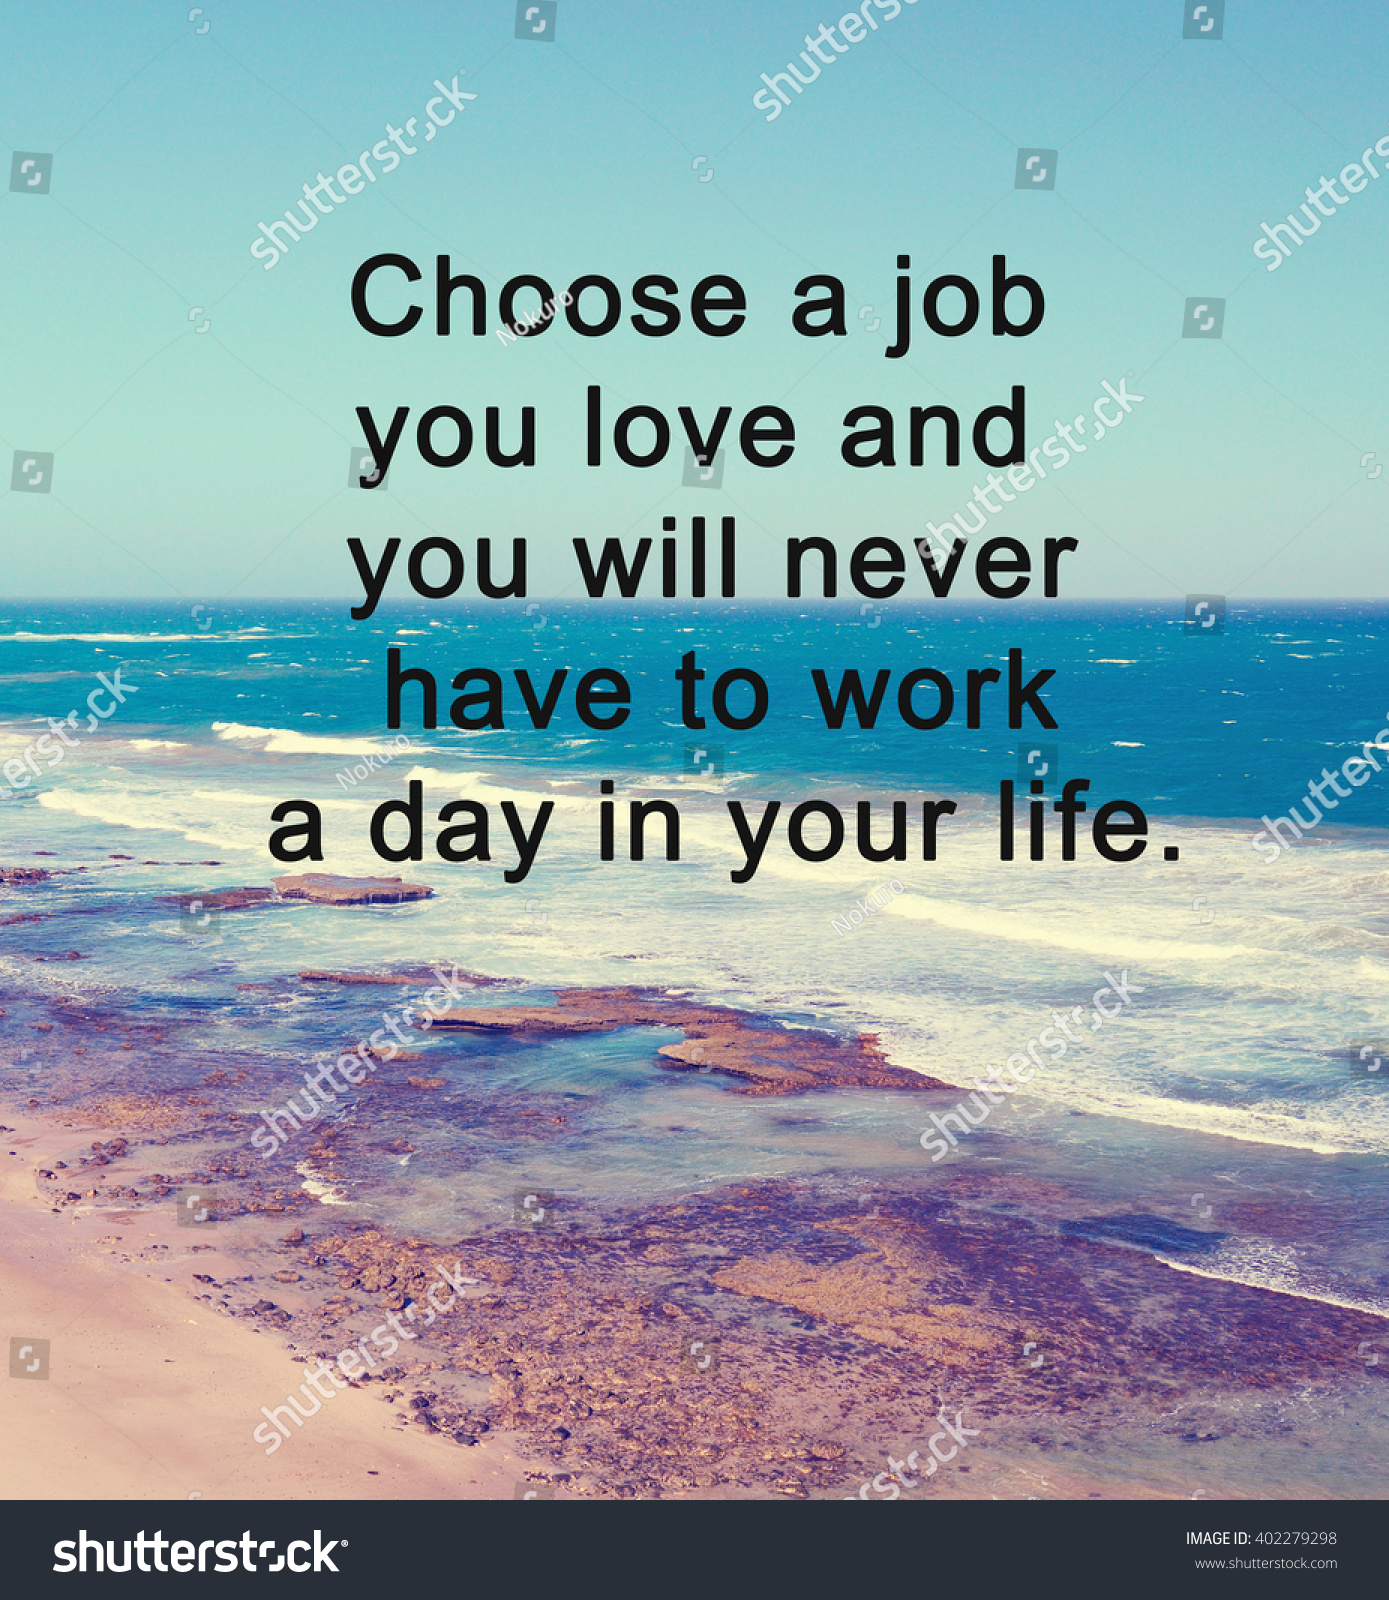 Inspirational life quote with phrase "choose a job you love and you will never have to work a day in your life" with ocean background retro style